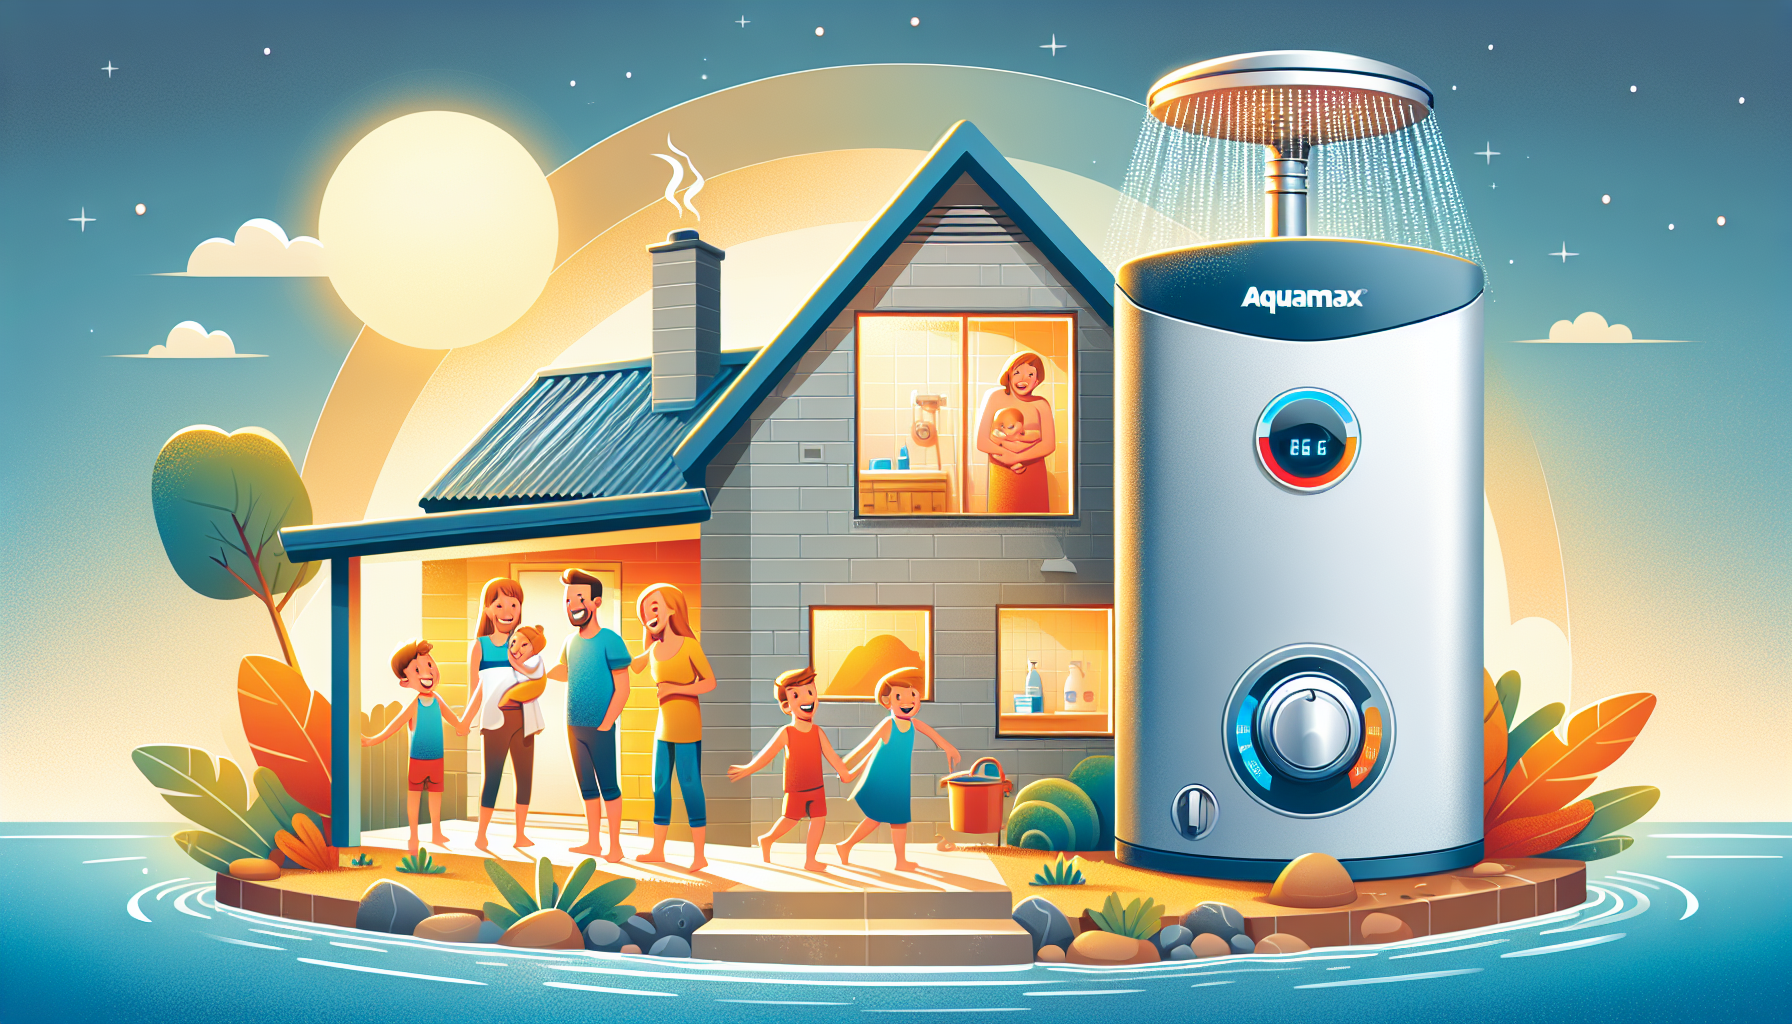 Reliable Choice for Families: Aquamax Hot Water Systems